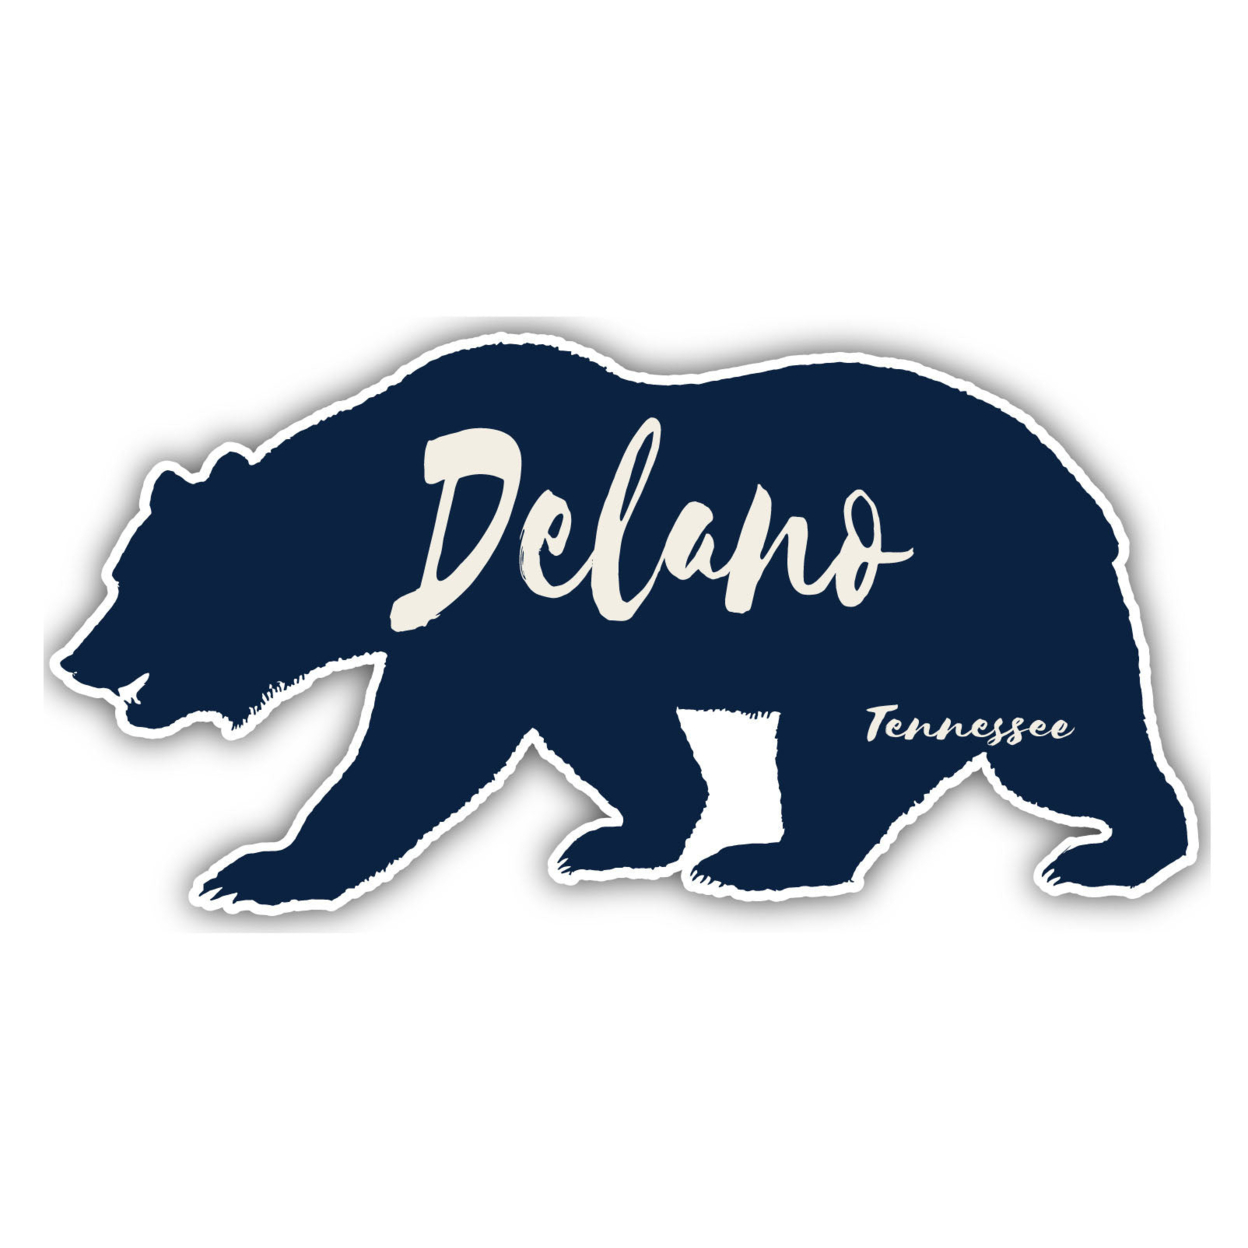 Delano Tennessee Souvenir Decorative Stickers (Choose Theme And Size) - 4-Pack, 6-Inch, Bear